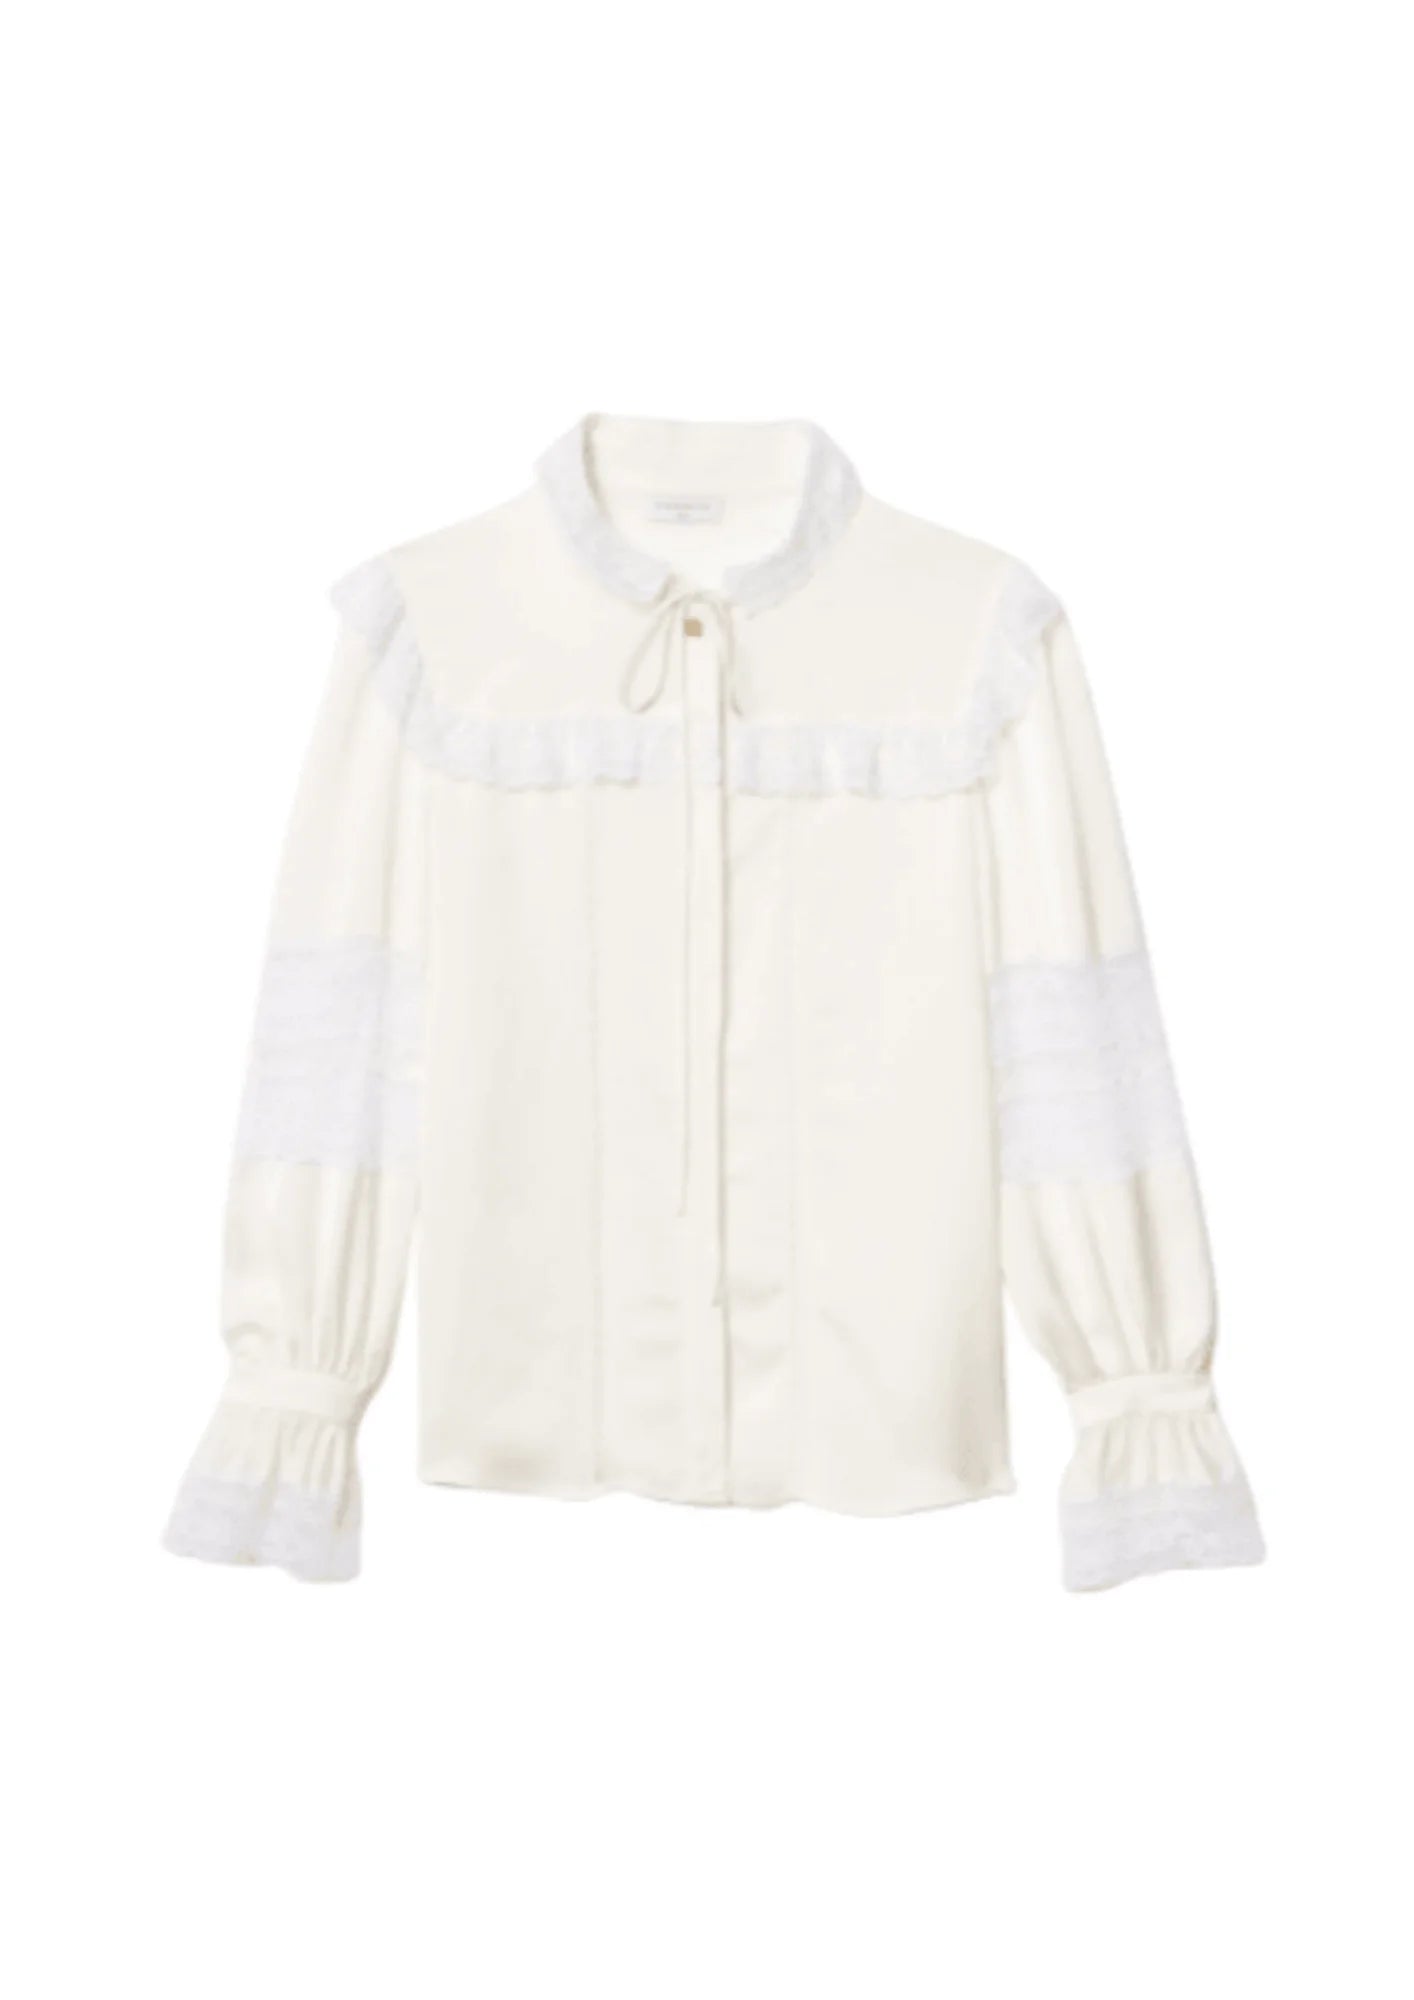 OFFWHITE BLOUSE WITH LACE DETAILS